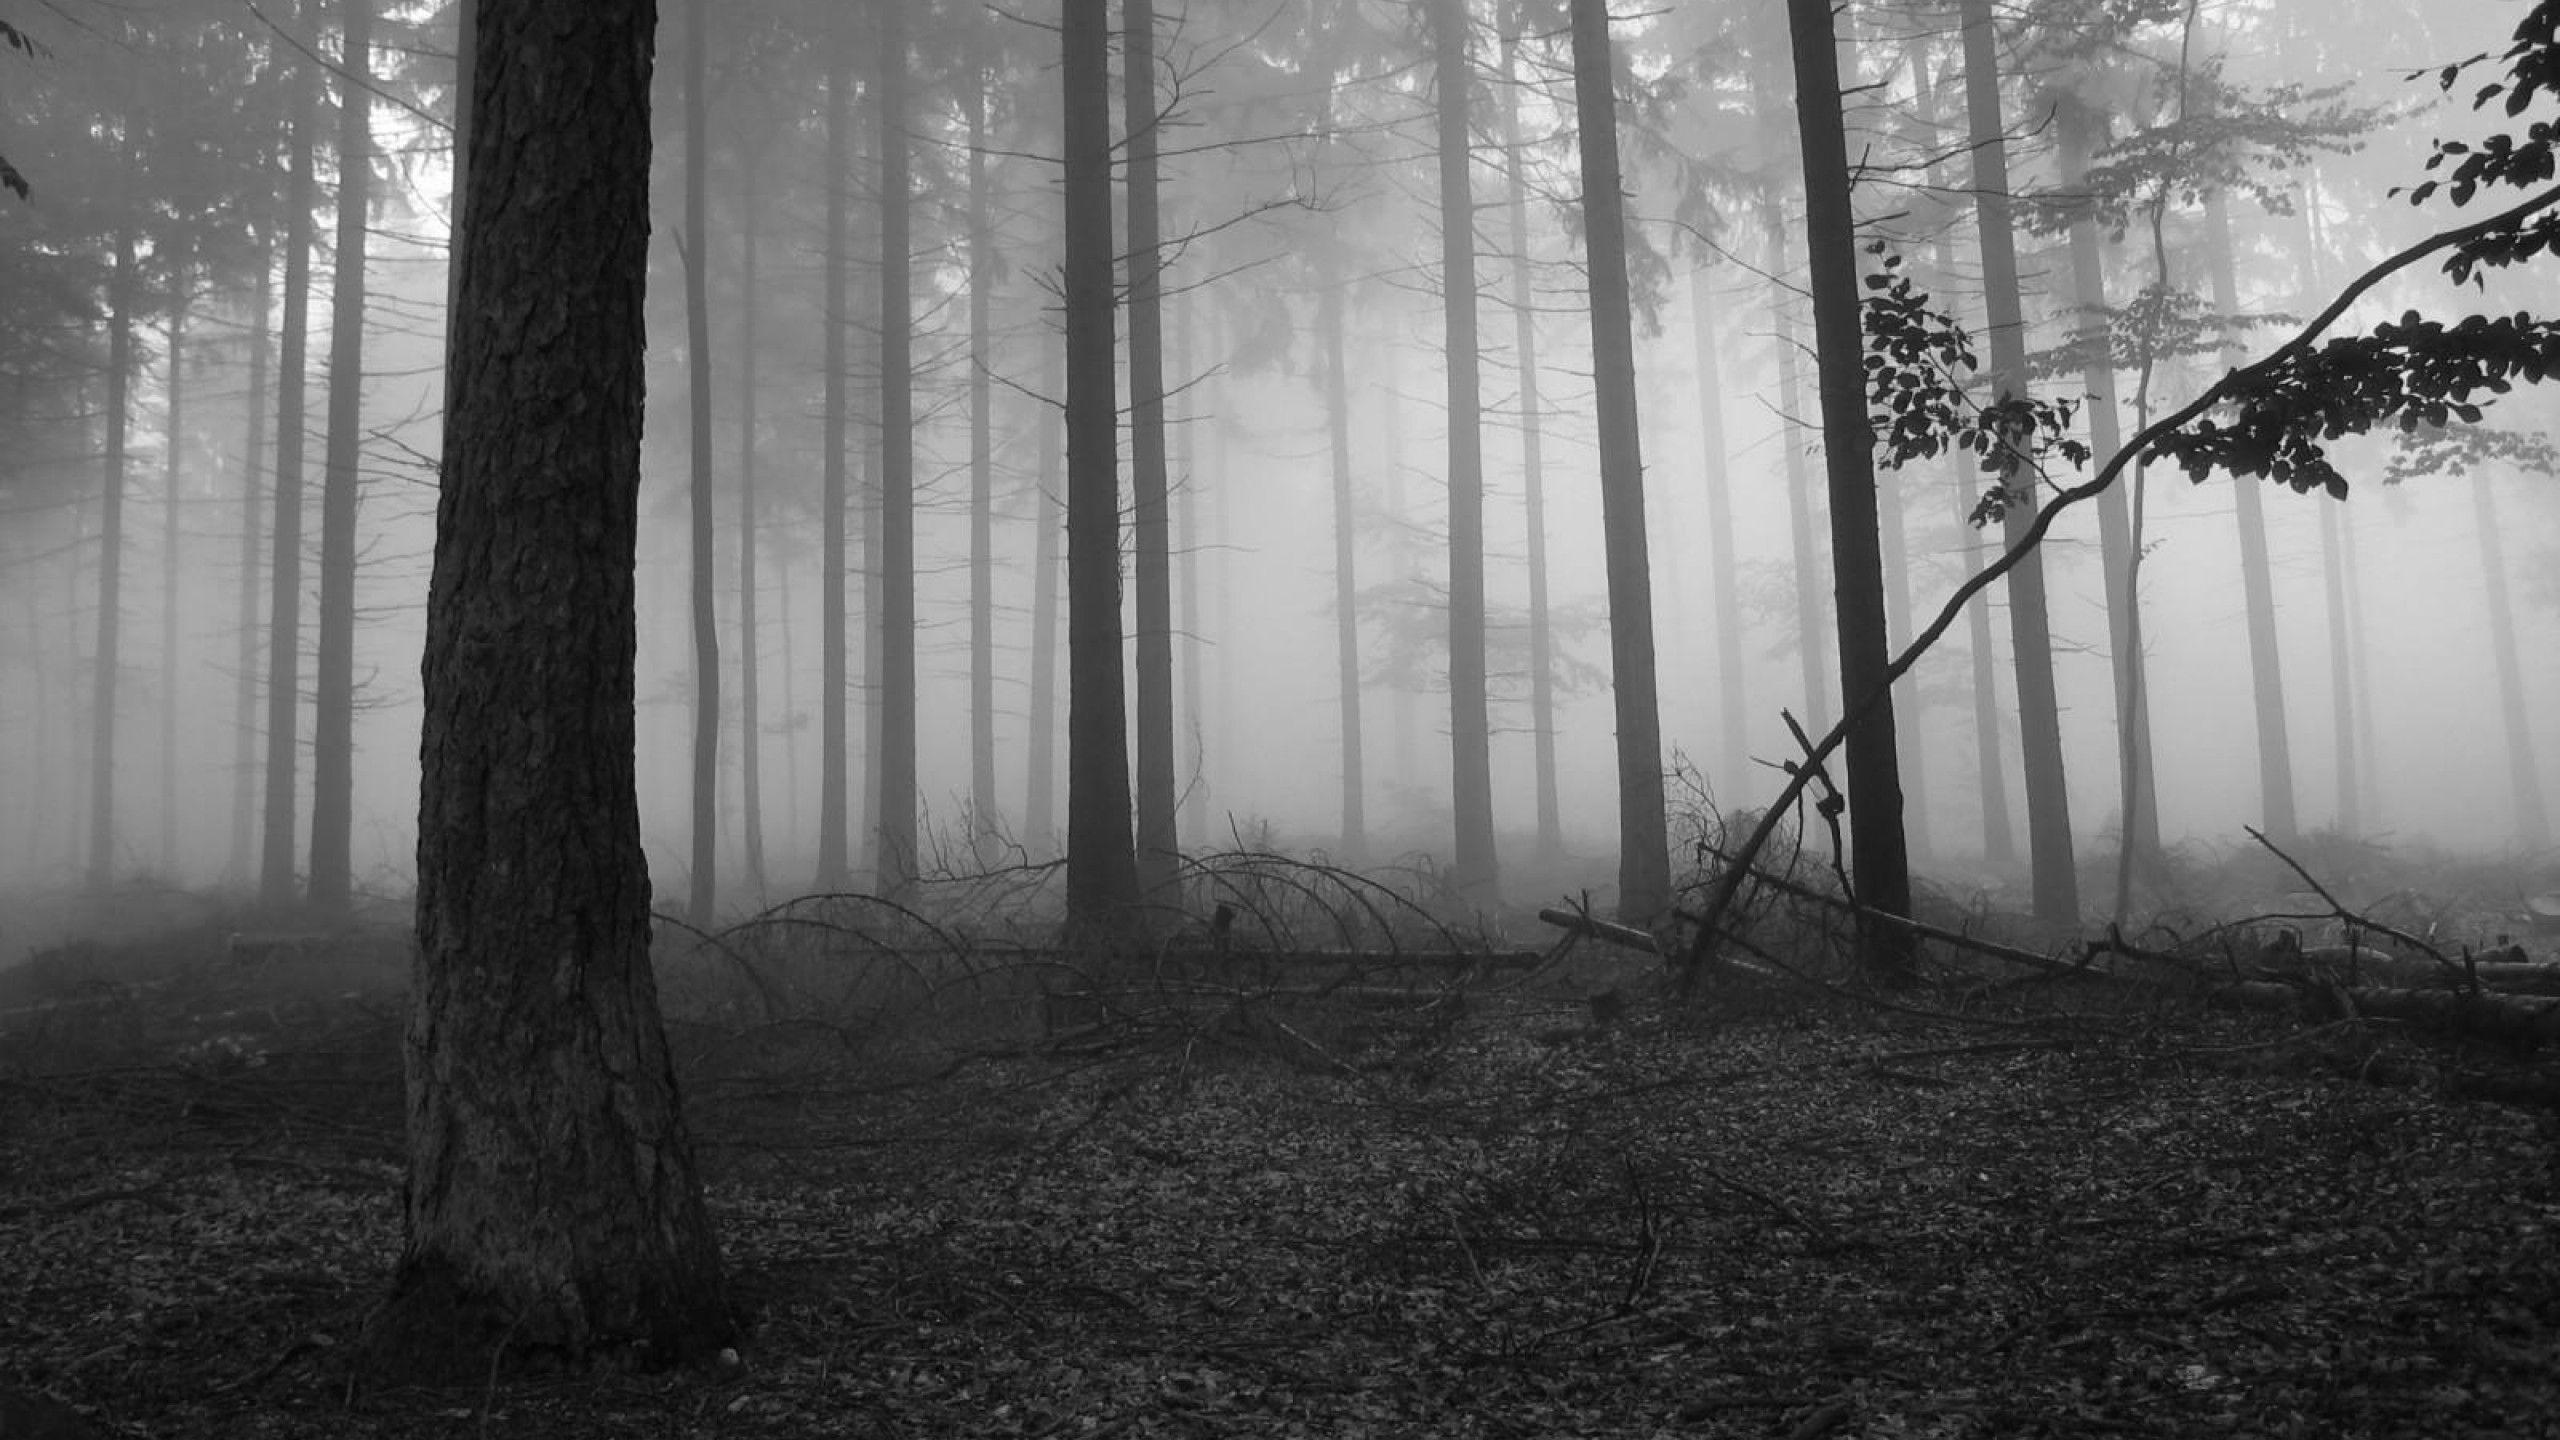 Widescreen Wallpaper of Scary Forest, New Photo